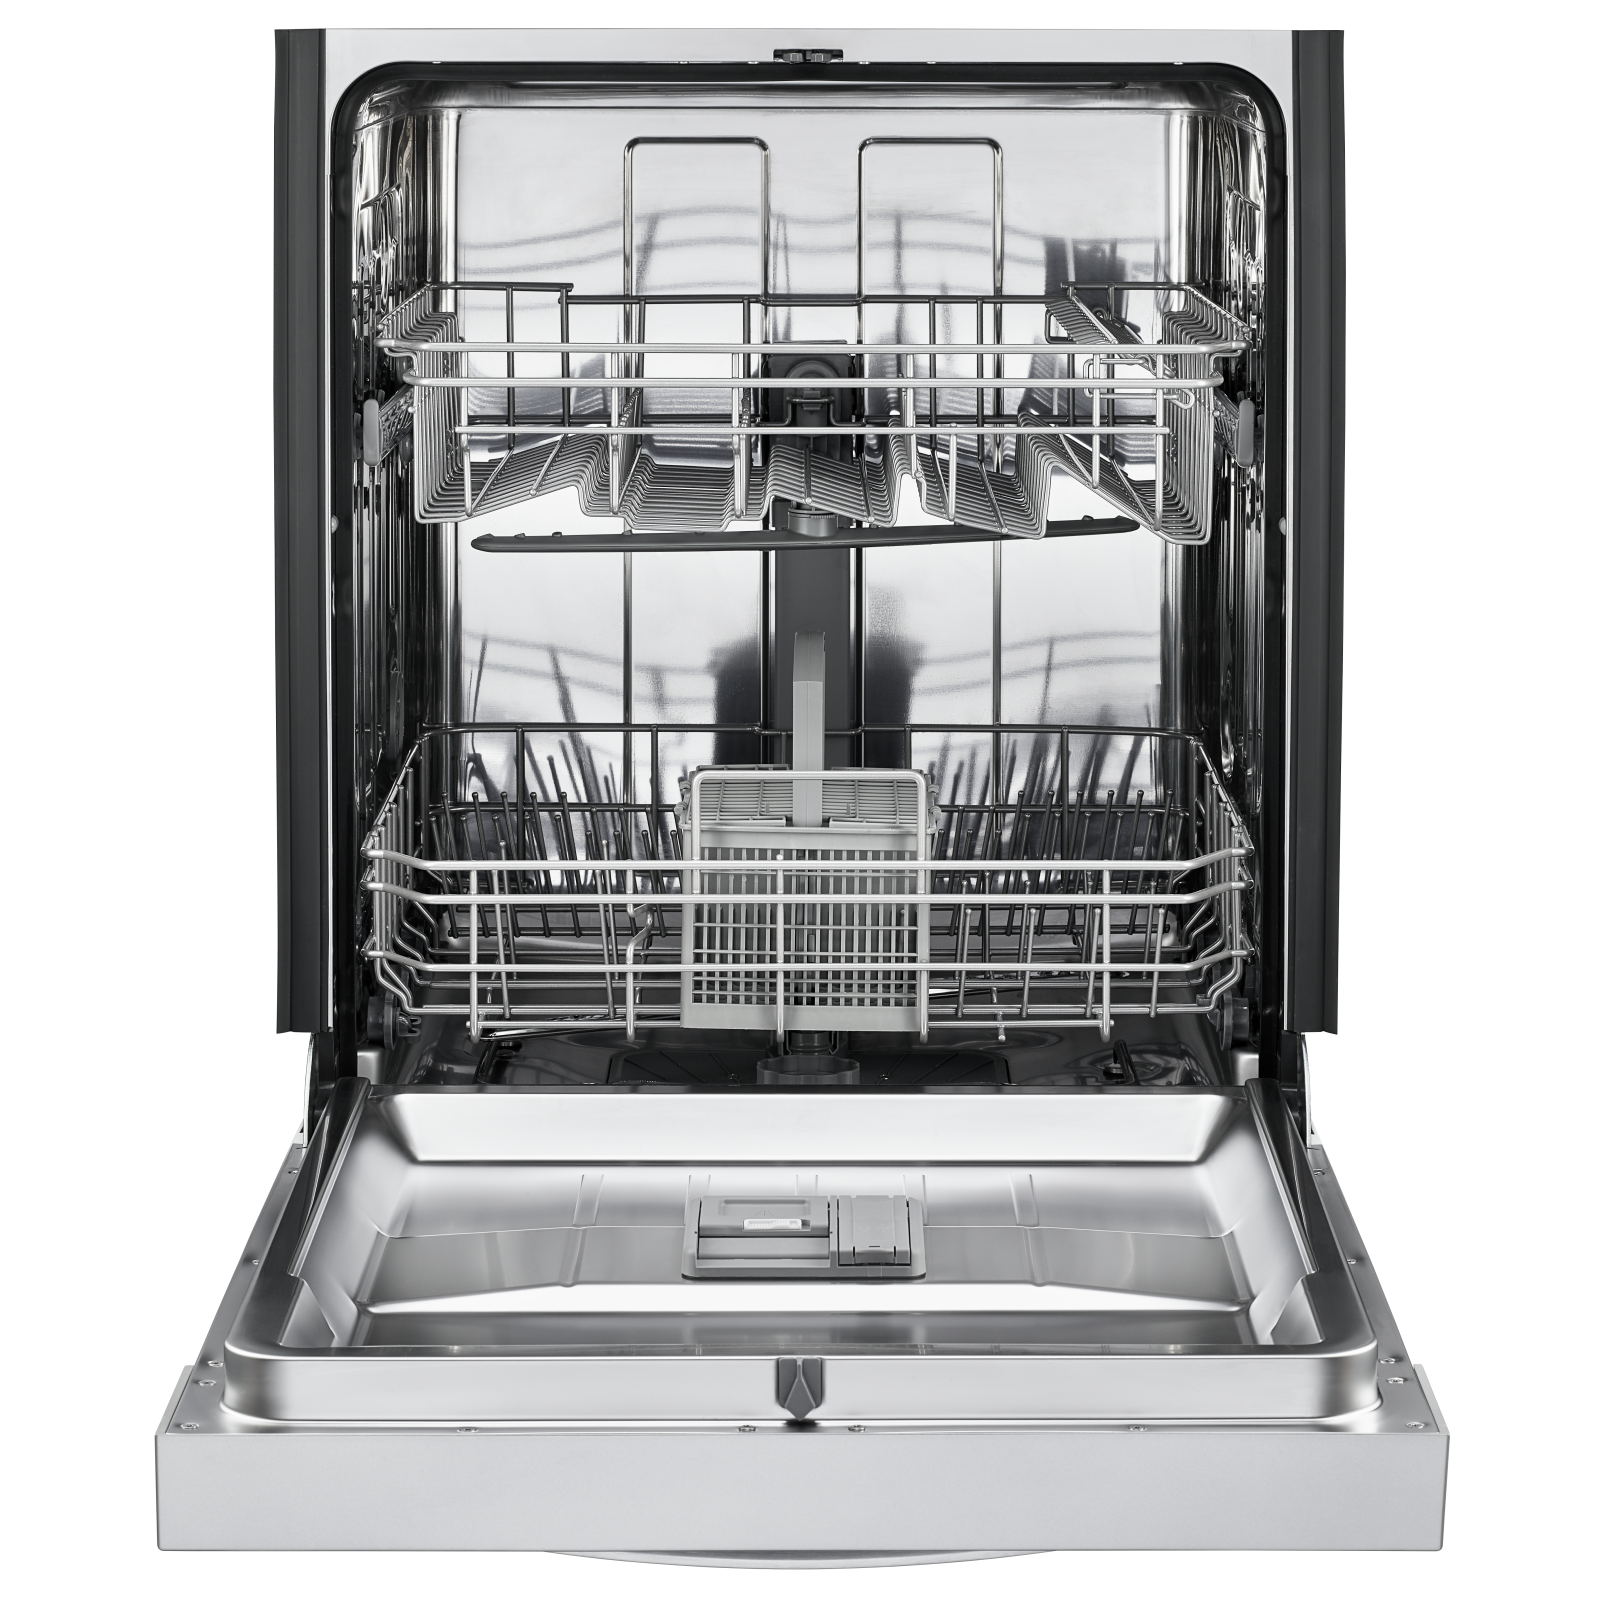 Whirlpool - 51 dBA Built In Dishwasher in Stainless - WDF550SAHS